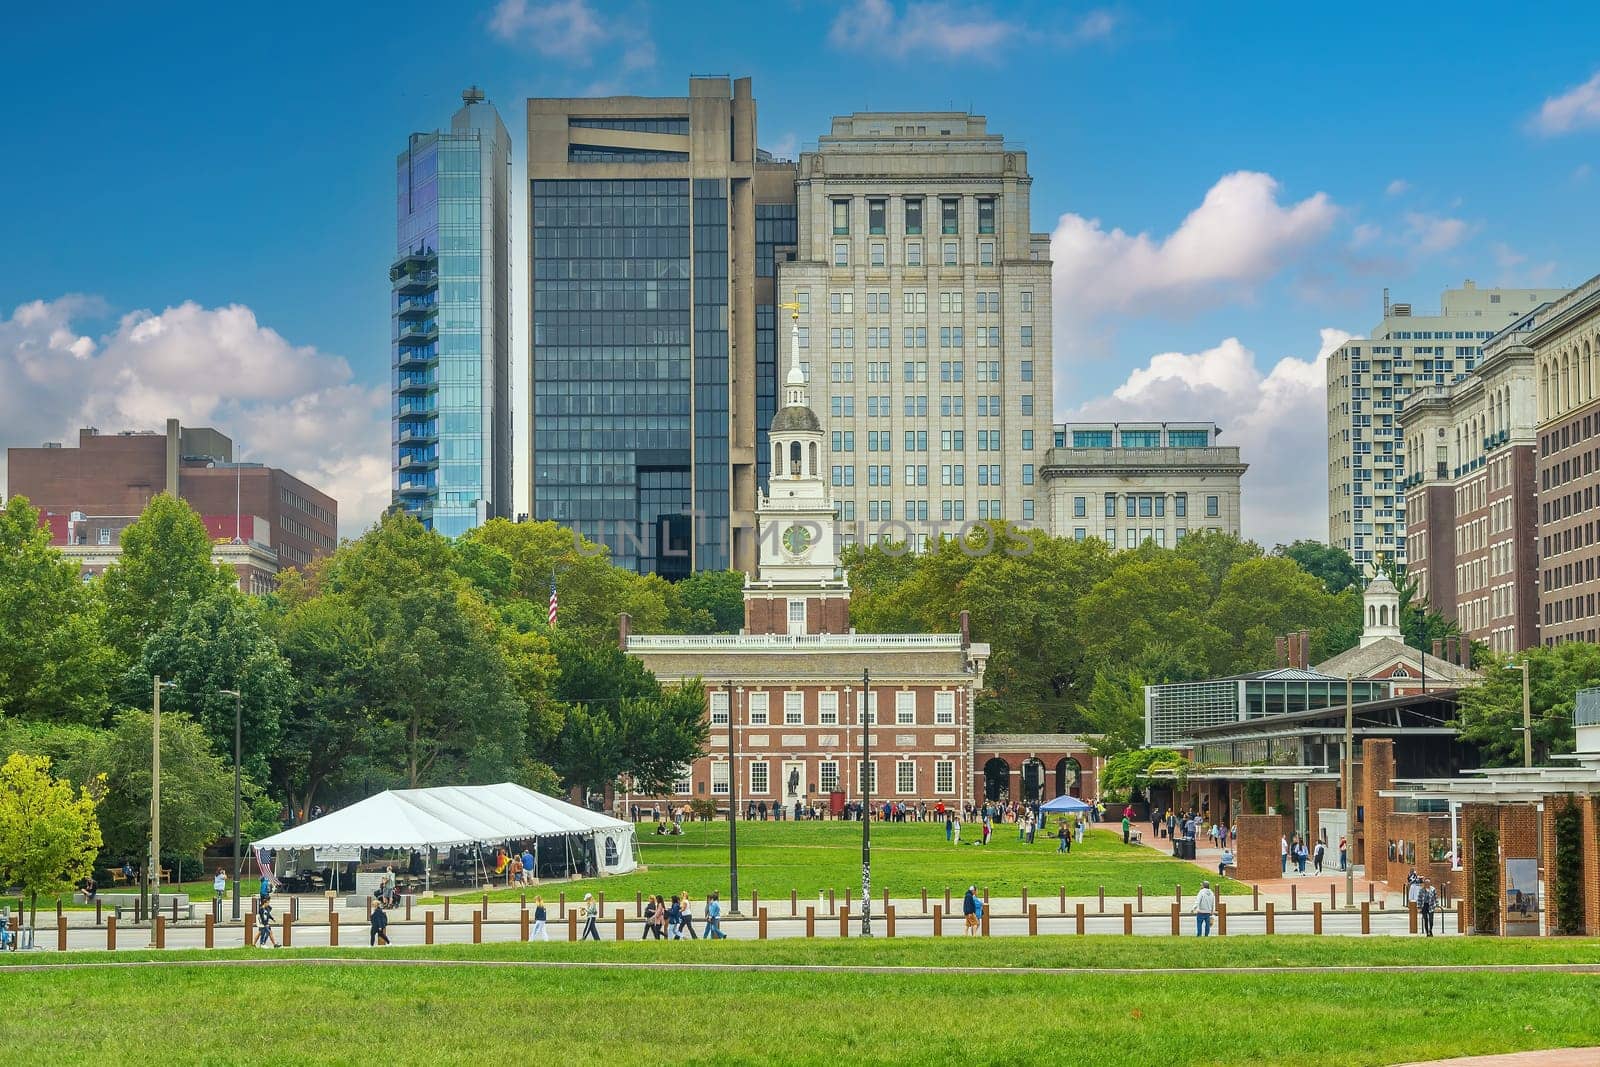 Independence Hall in downtown Philadelphia, Pennsylvania by f11photo